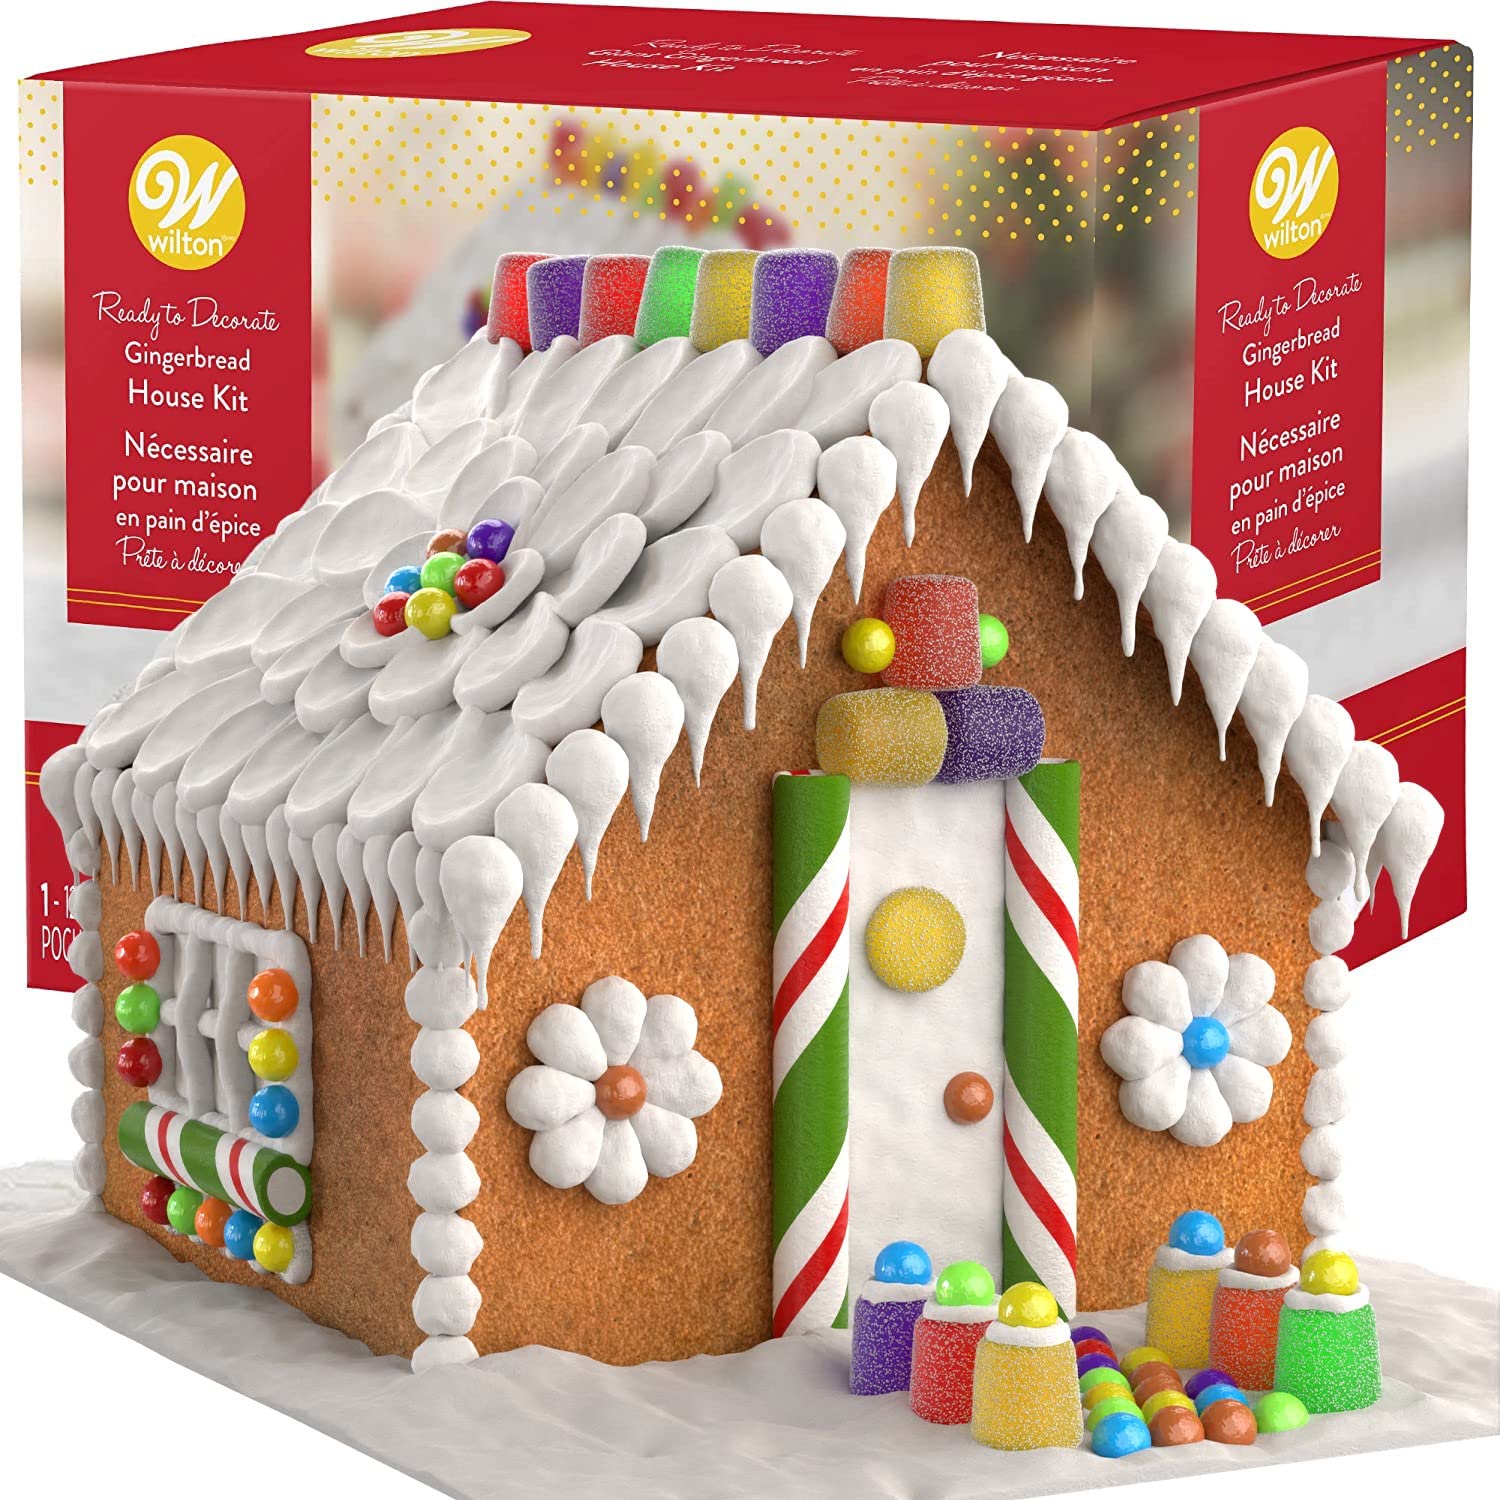 Gingerbread House Kit, Pre-Baked & Pre-Assembled BIG Traditional